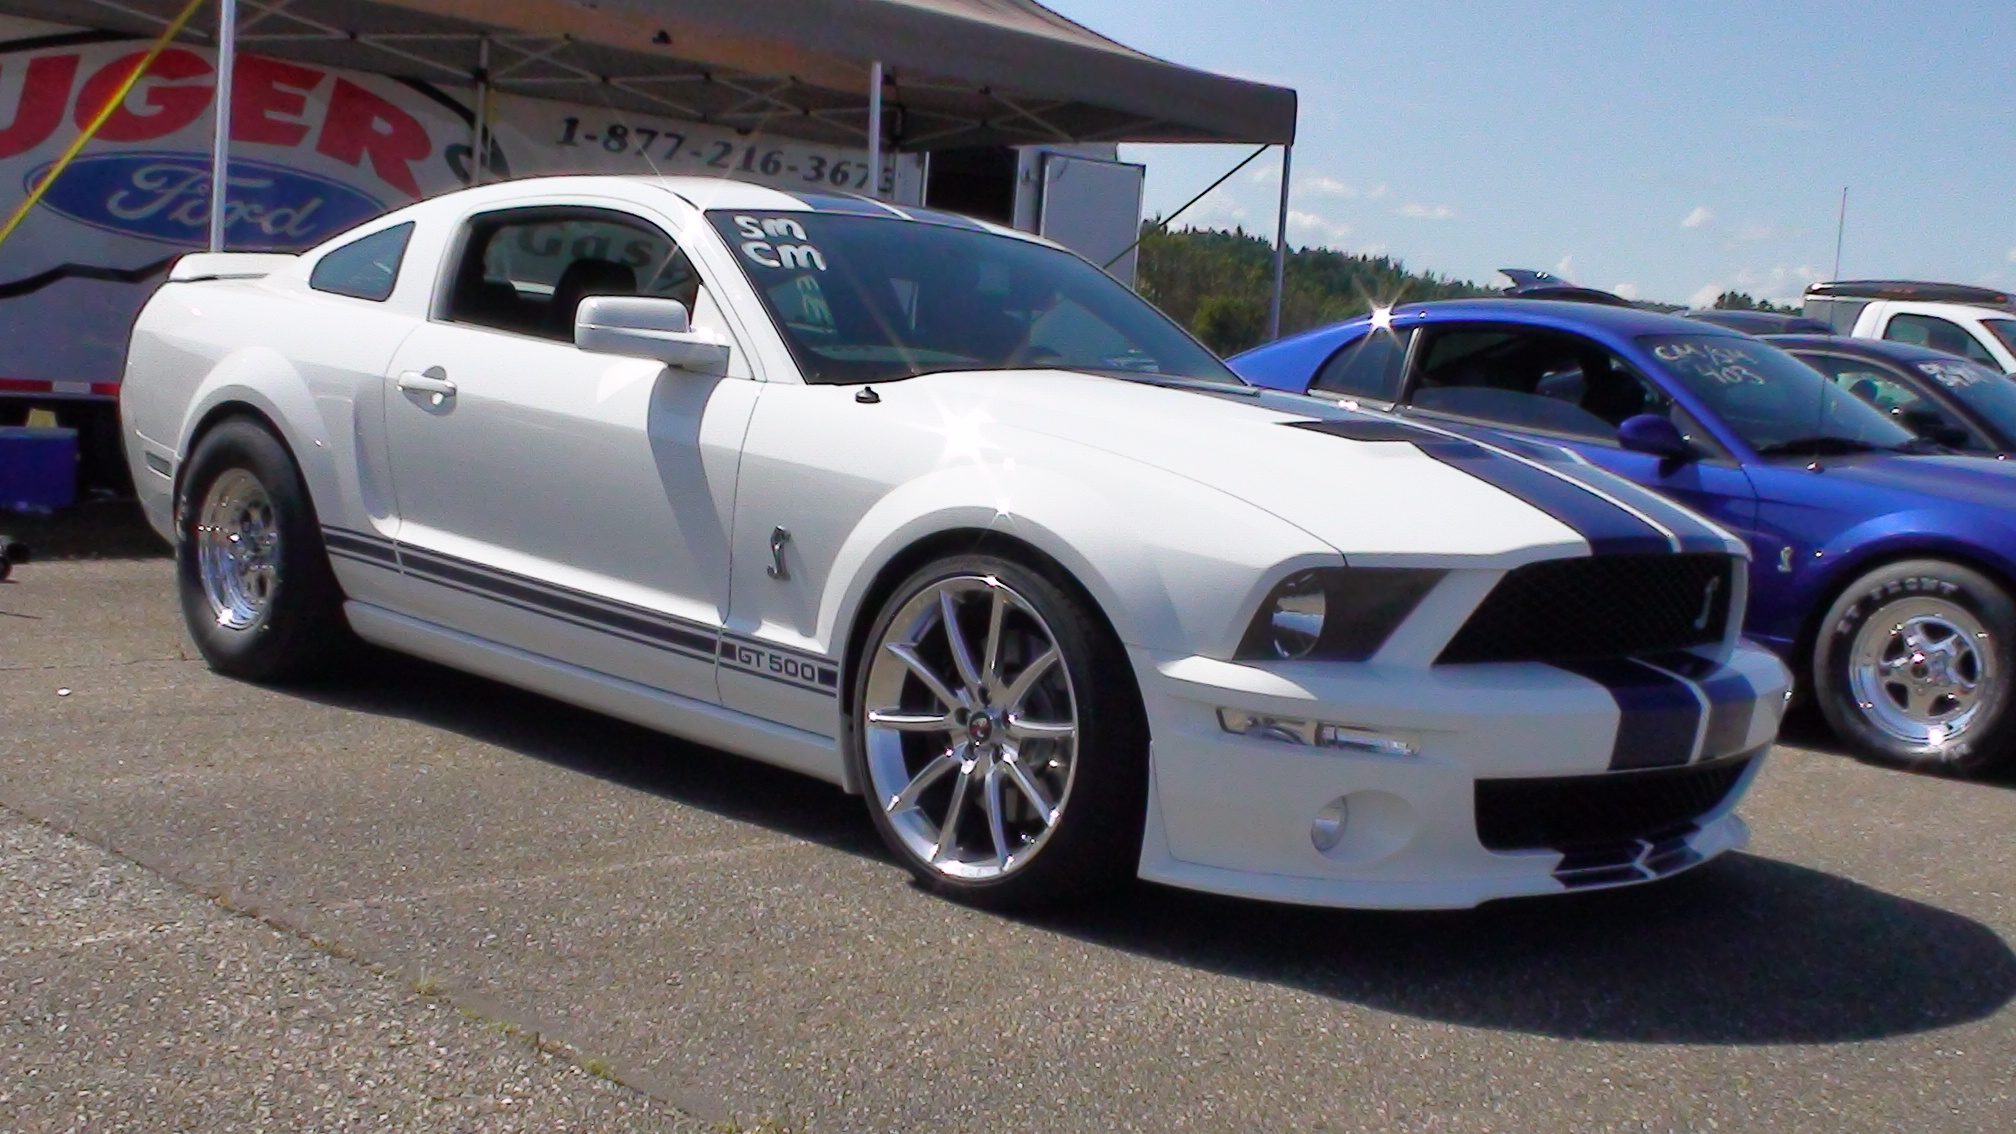 2007 Ford mustang shelby gt500 1/4 mile #2